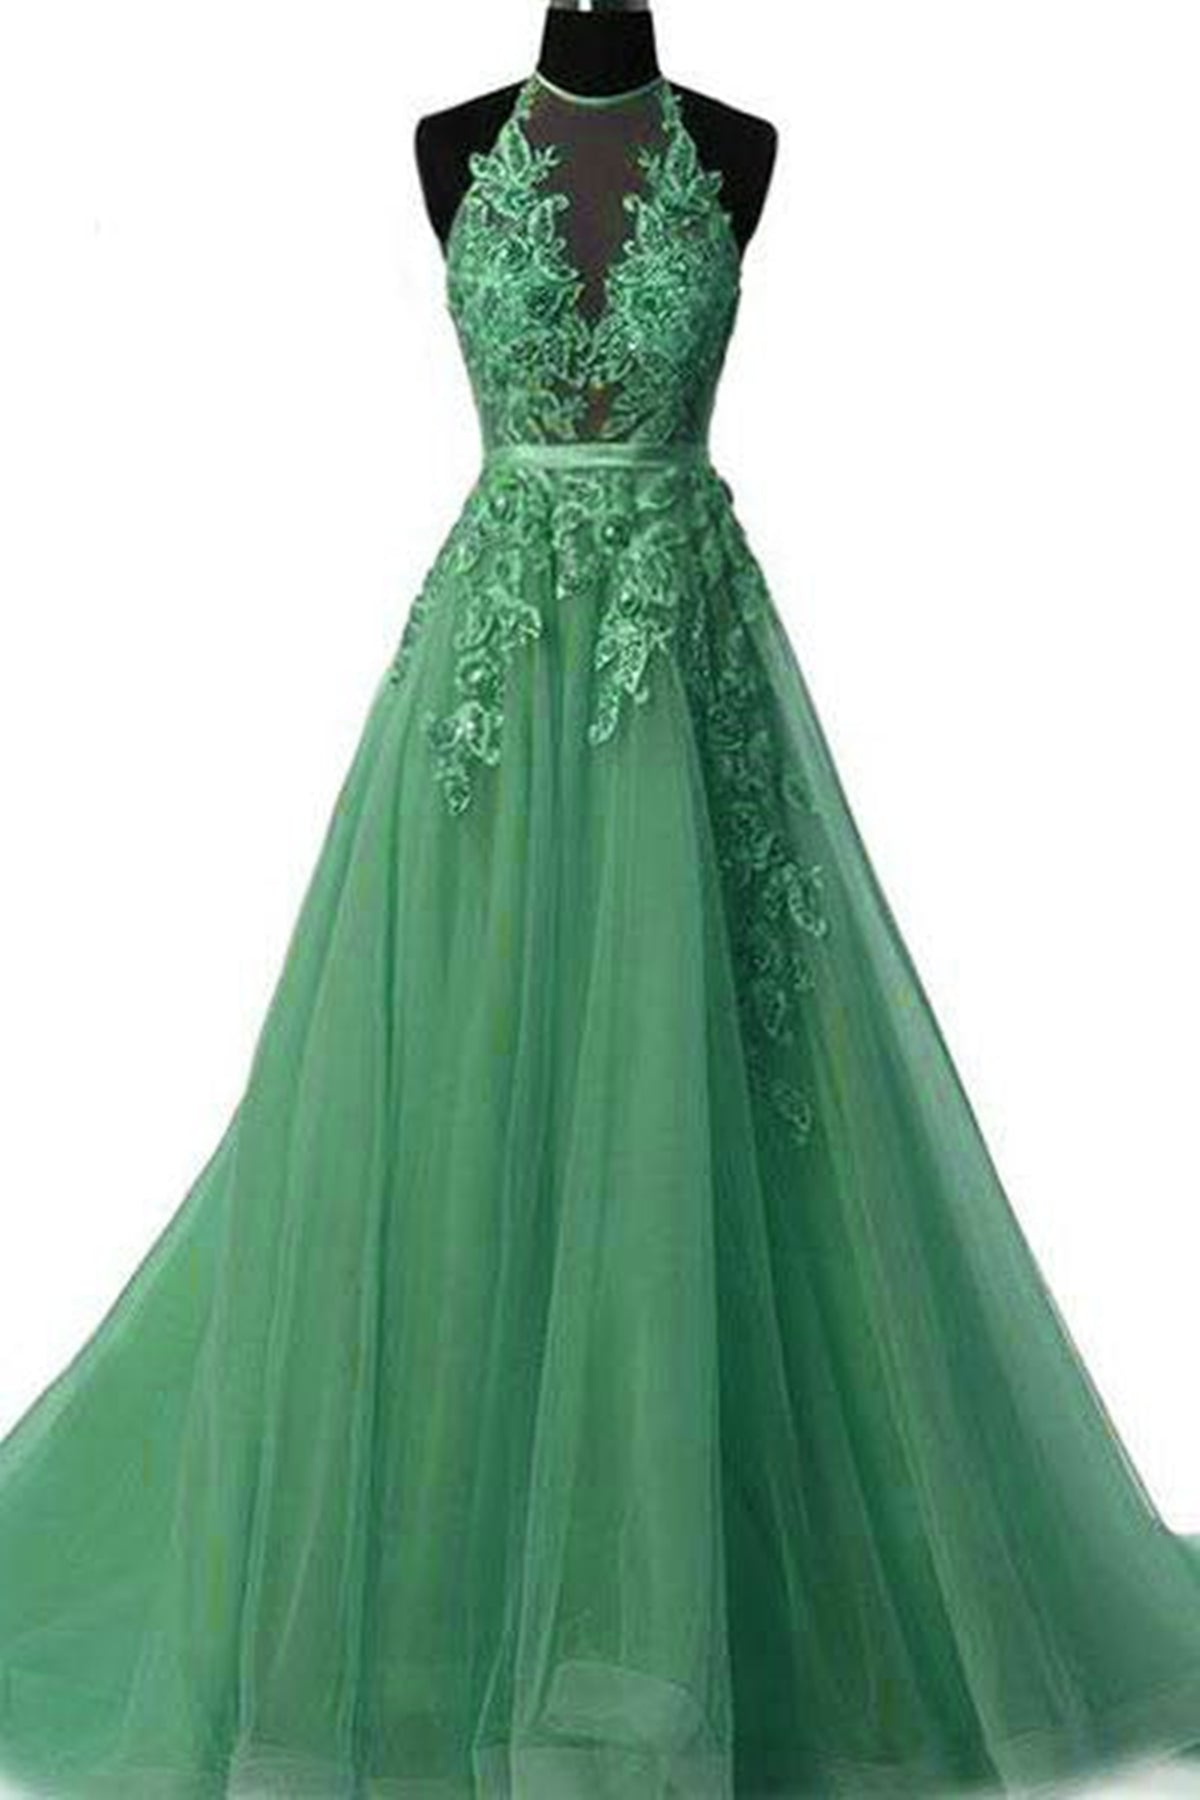 Halter Neck Backless Green Lace Long Prom Dresses, Green Lace Formal Dresses, Green Evening Dresses